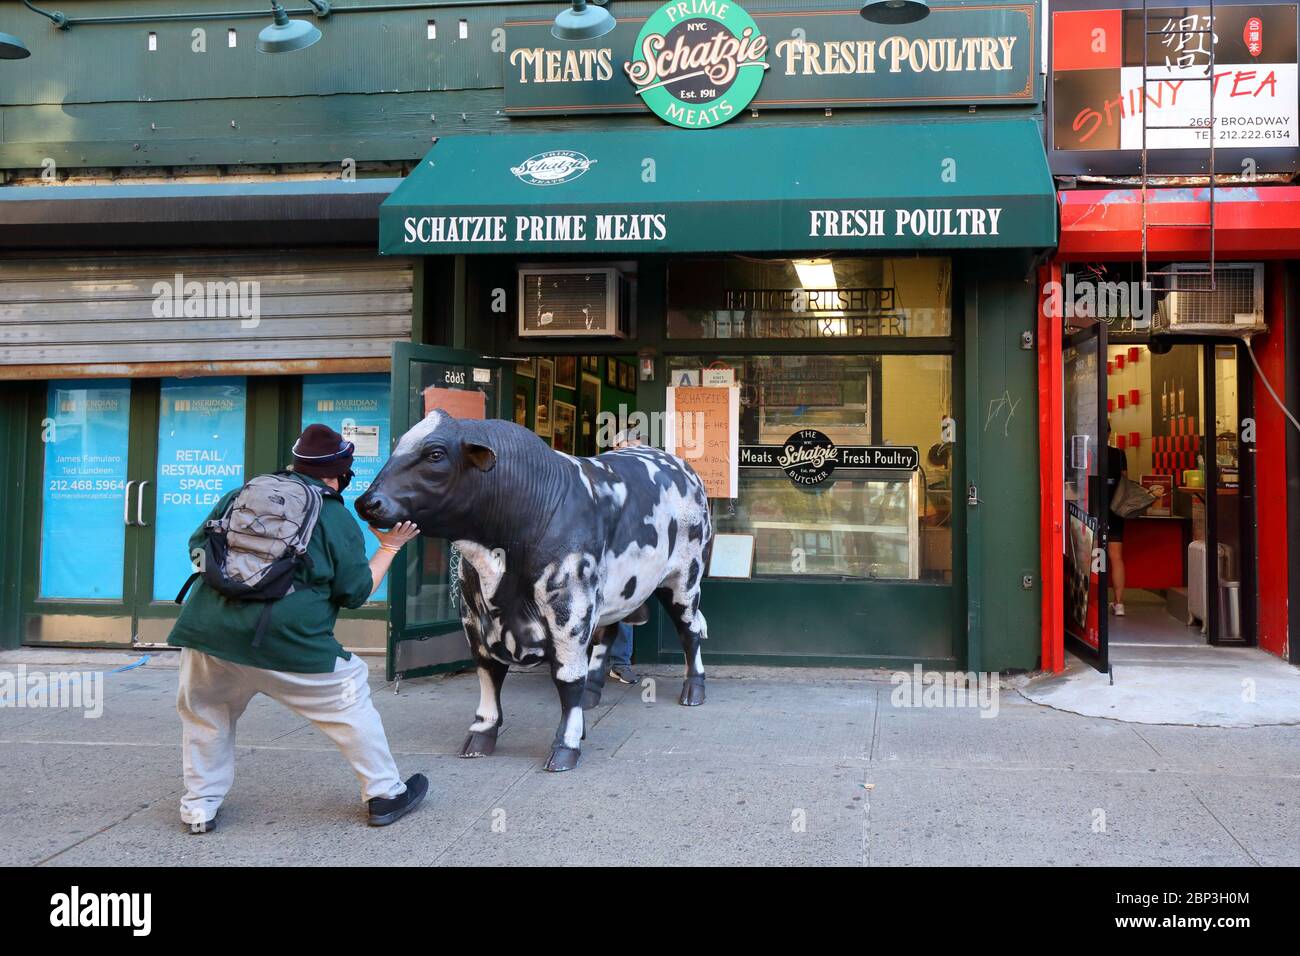 A person wrangles a prop steer back into Schatzie Prime Meats, 2665 Broadway in the Upper West Side of Manhattan, New York. Stock Photo